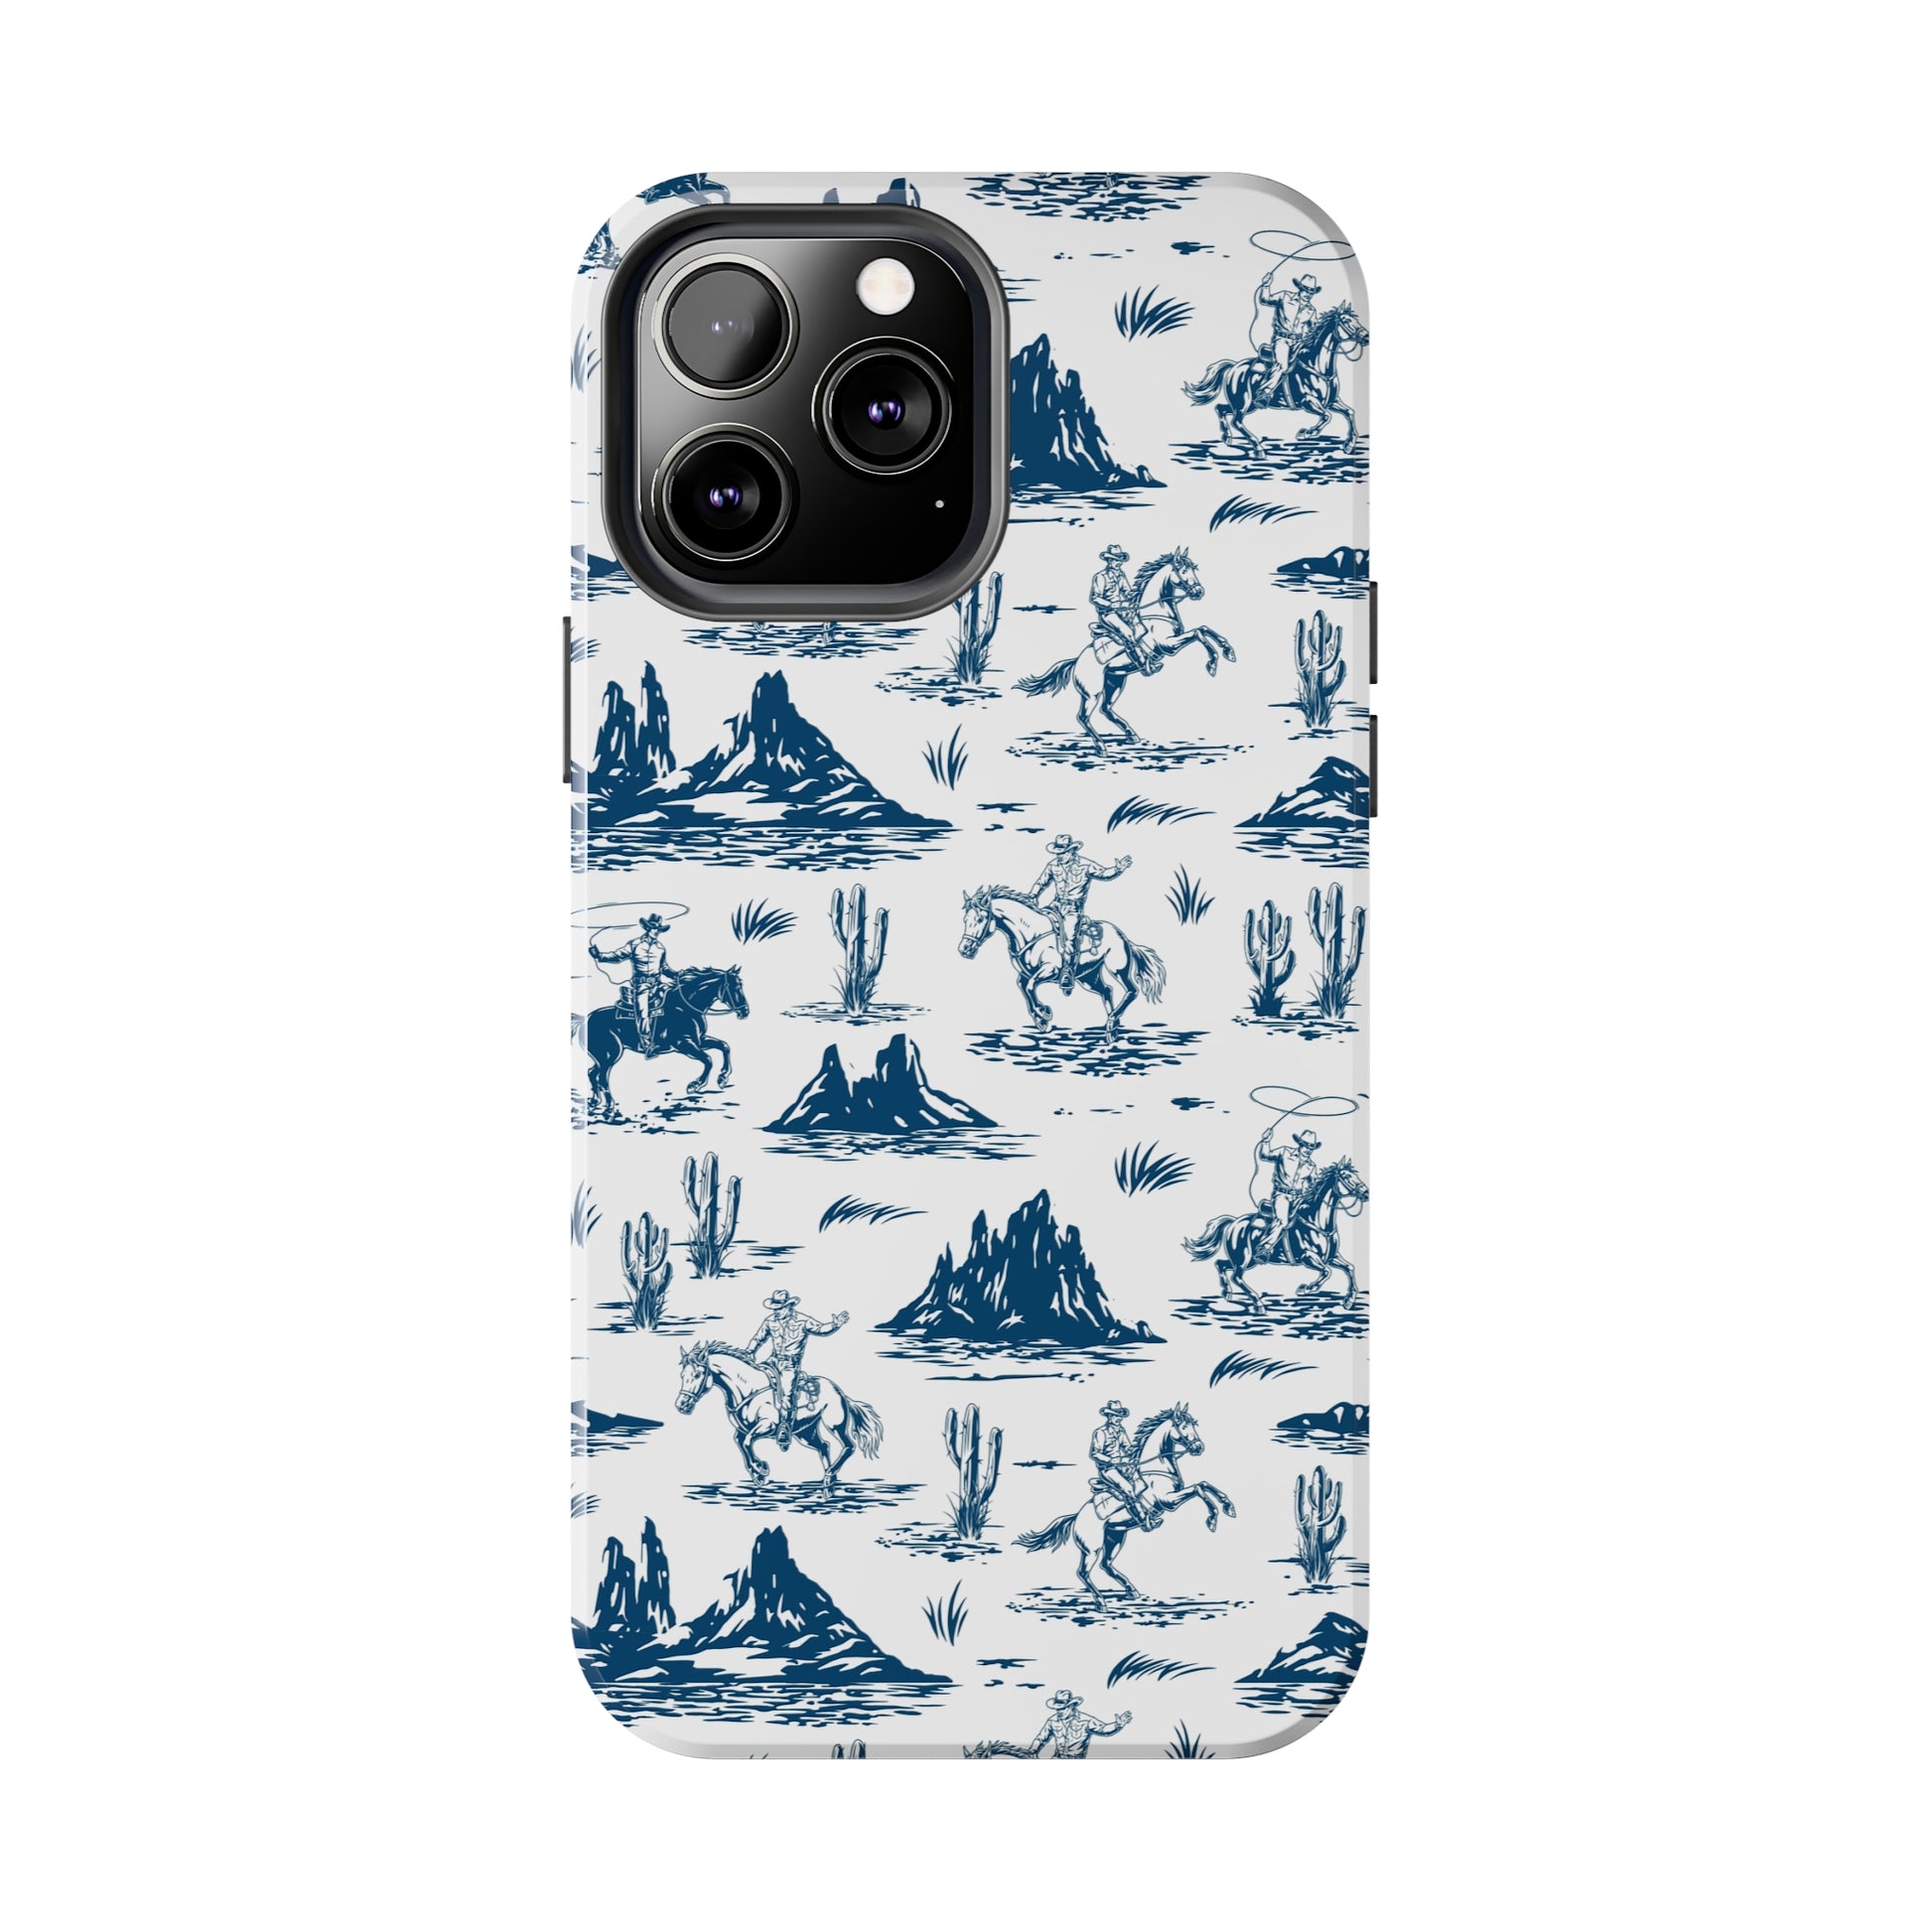 Home on the Range - Phone Case For